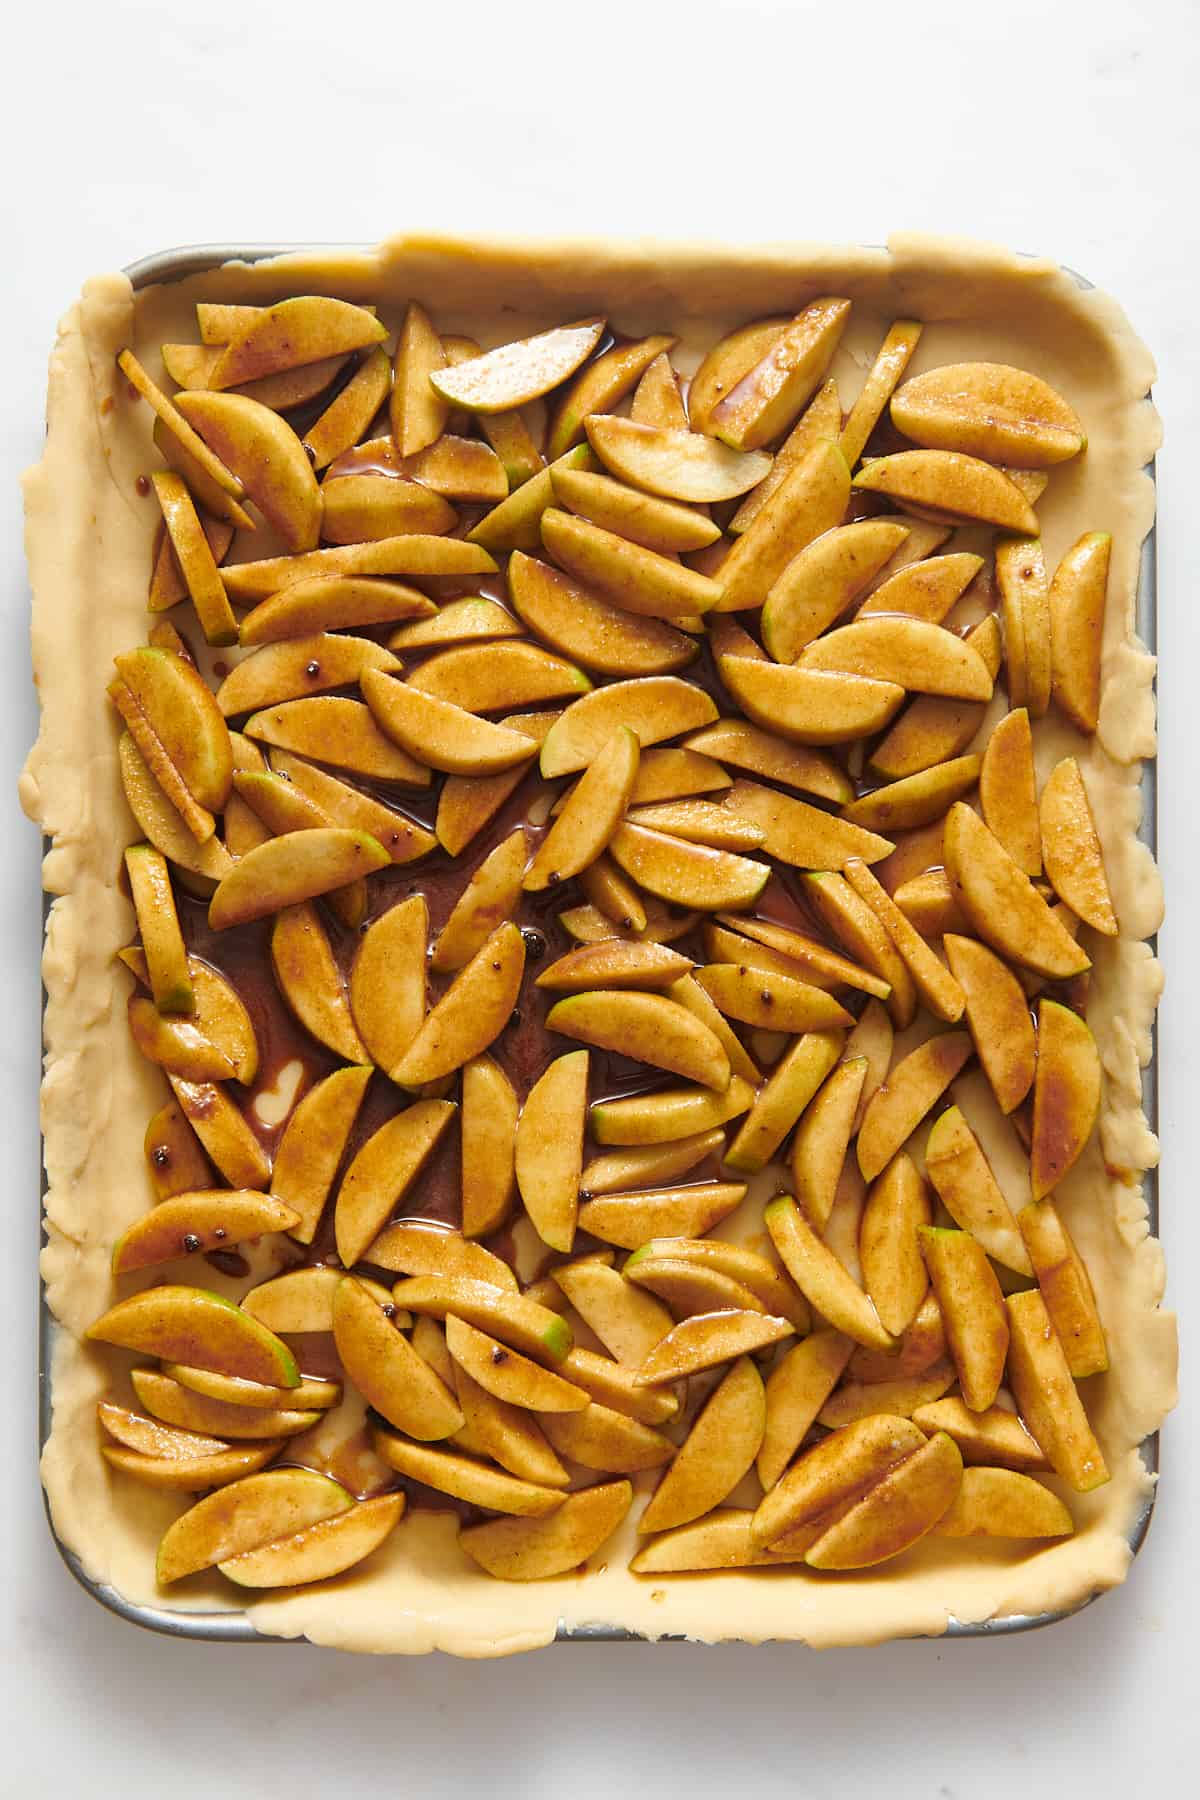 sliced green apples tossed in a cinnamon, brown sugar mixture spread evenly on a pie crust-lined baking tray.